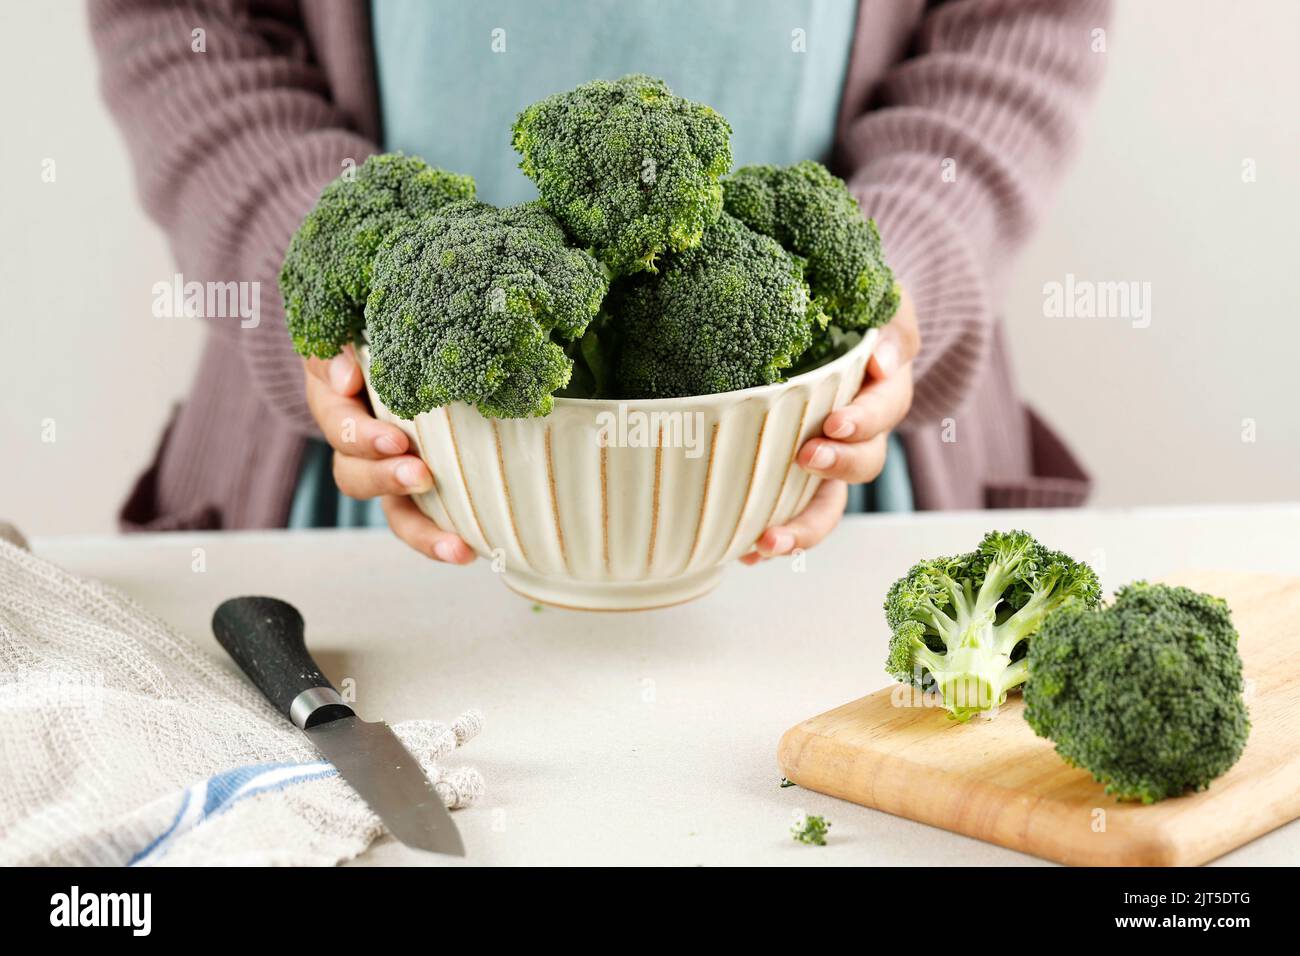 Female Hand Holding A Bowl of Broccoli, Concept Cooking Healthy Food Stock Photo